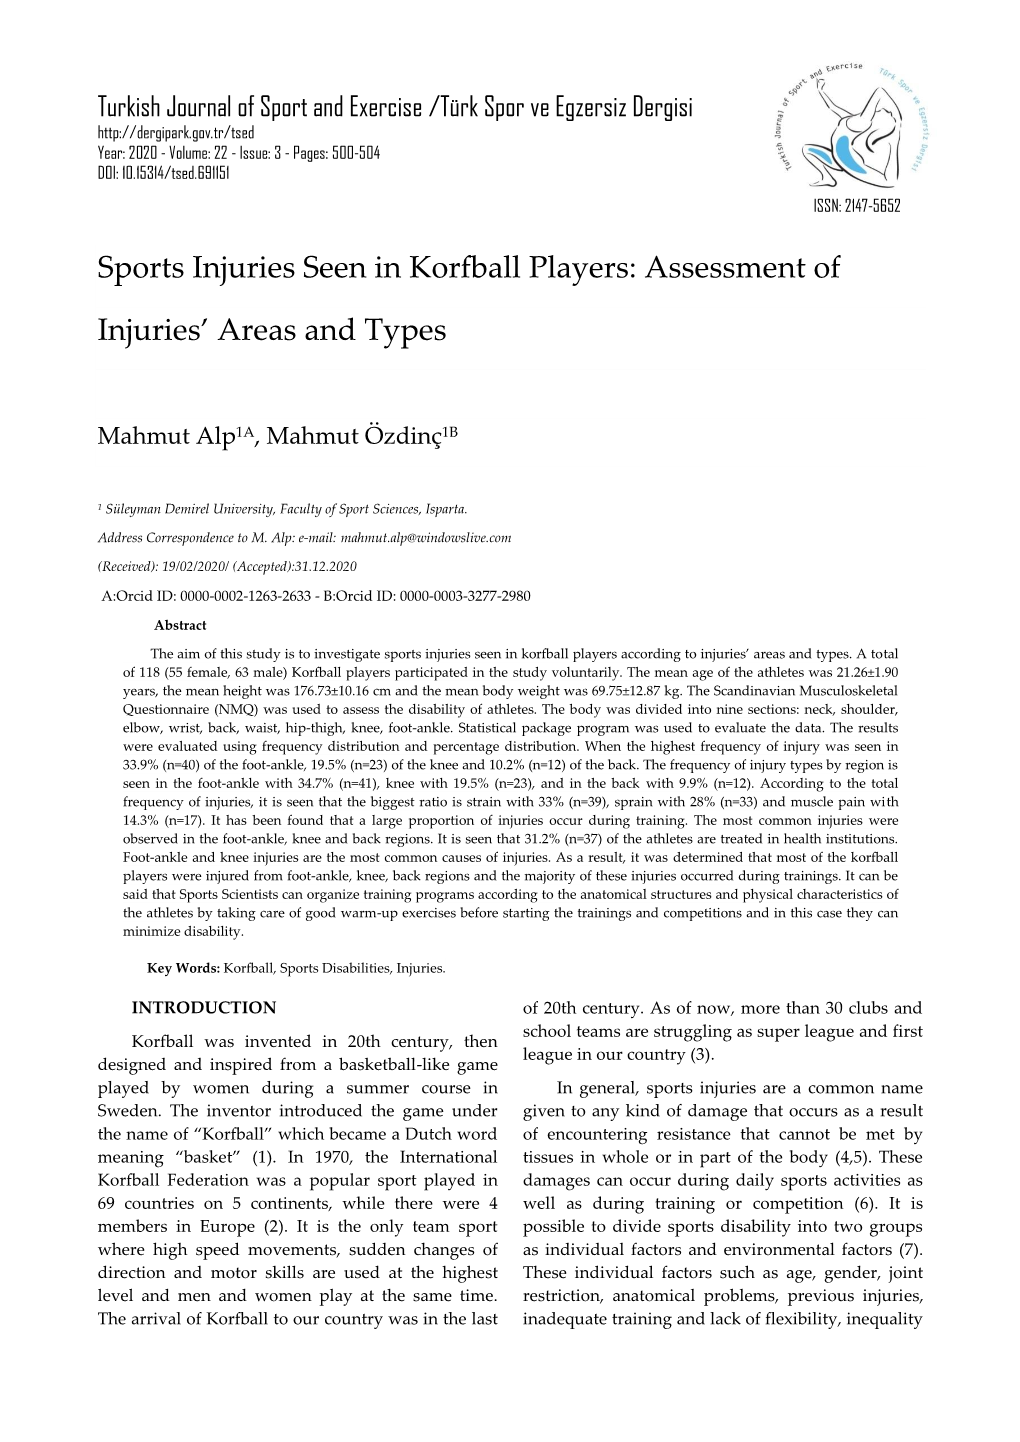 Sports Injuries Seen in Korfball Players: Assessment Of